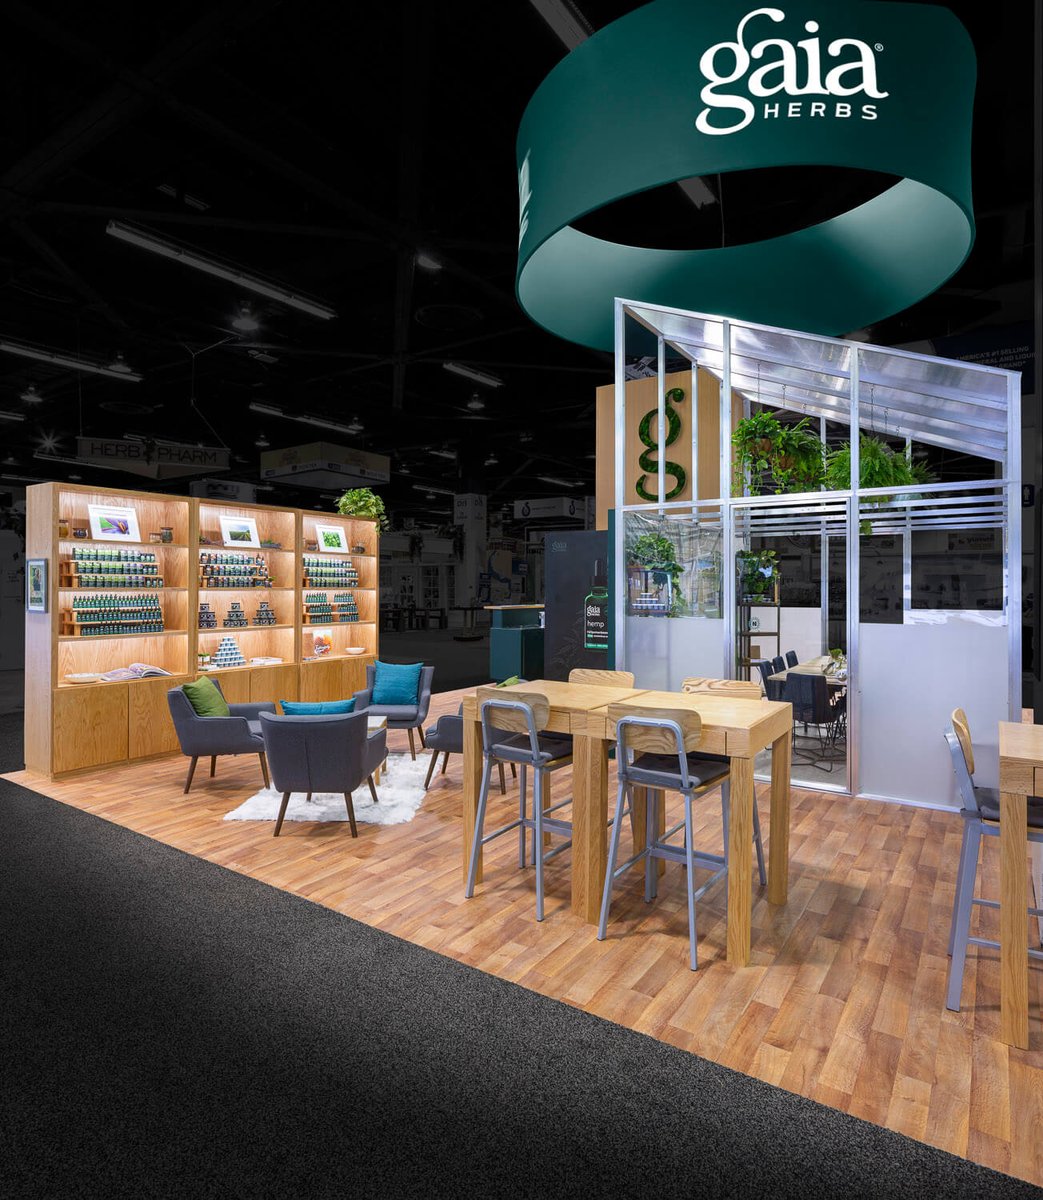 6️⃣ tips to ensure your conference room or meeting area is perfect for your exhibit space and your event goals >> condit.com/trade-show-con…
.
.
.
#tradeshow #tradeshows #events #eventmarketing #design #marketing #eventprofs